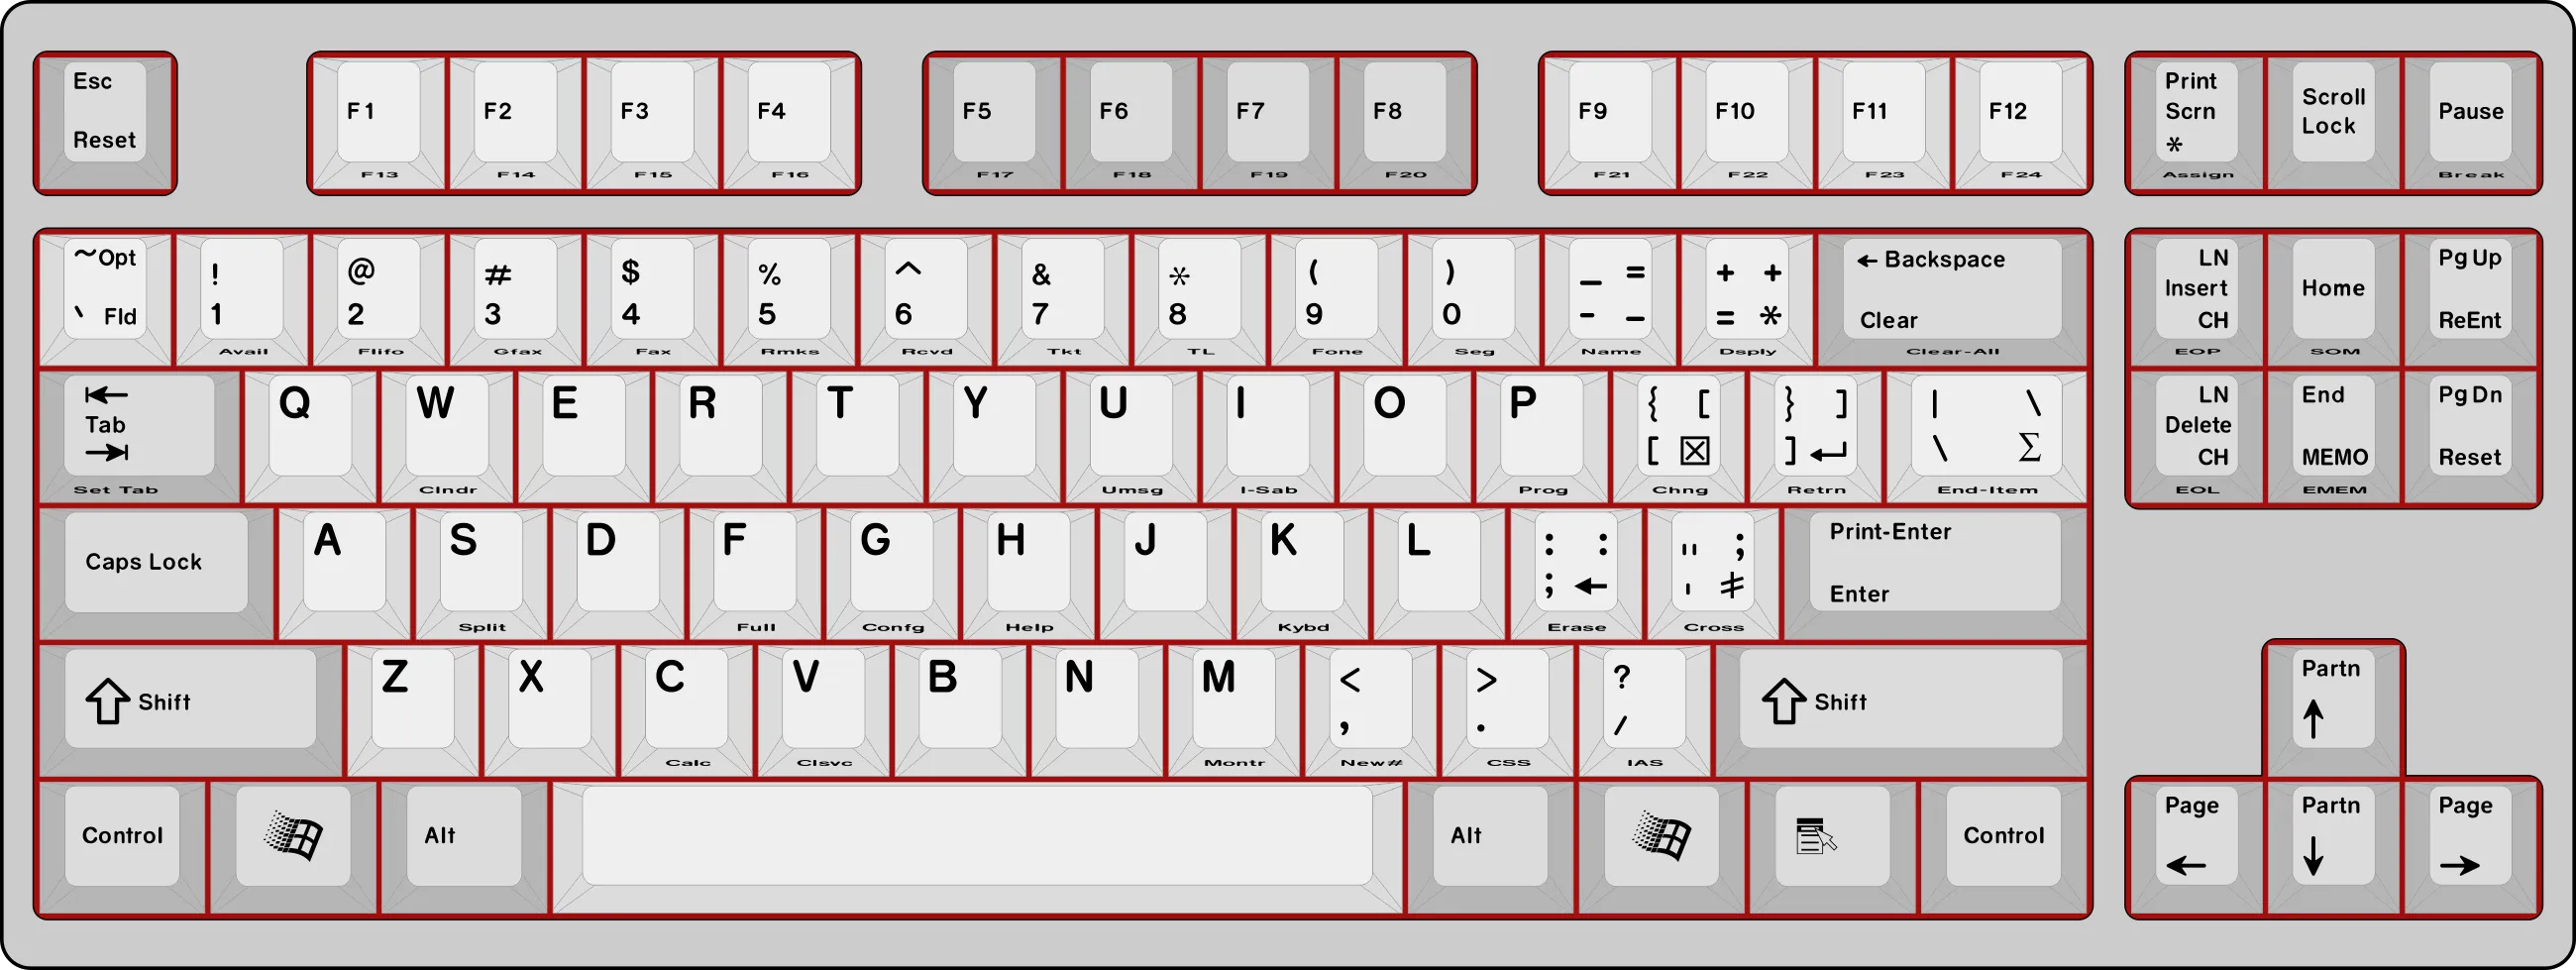 Image for (In Stock) CRP R5 Keyset